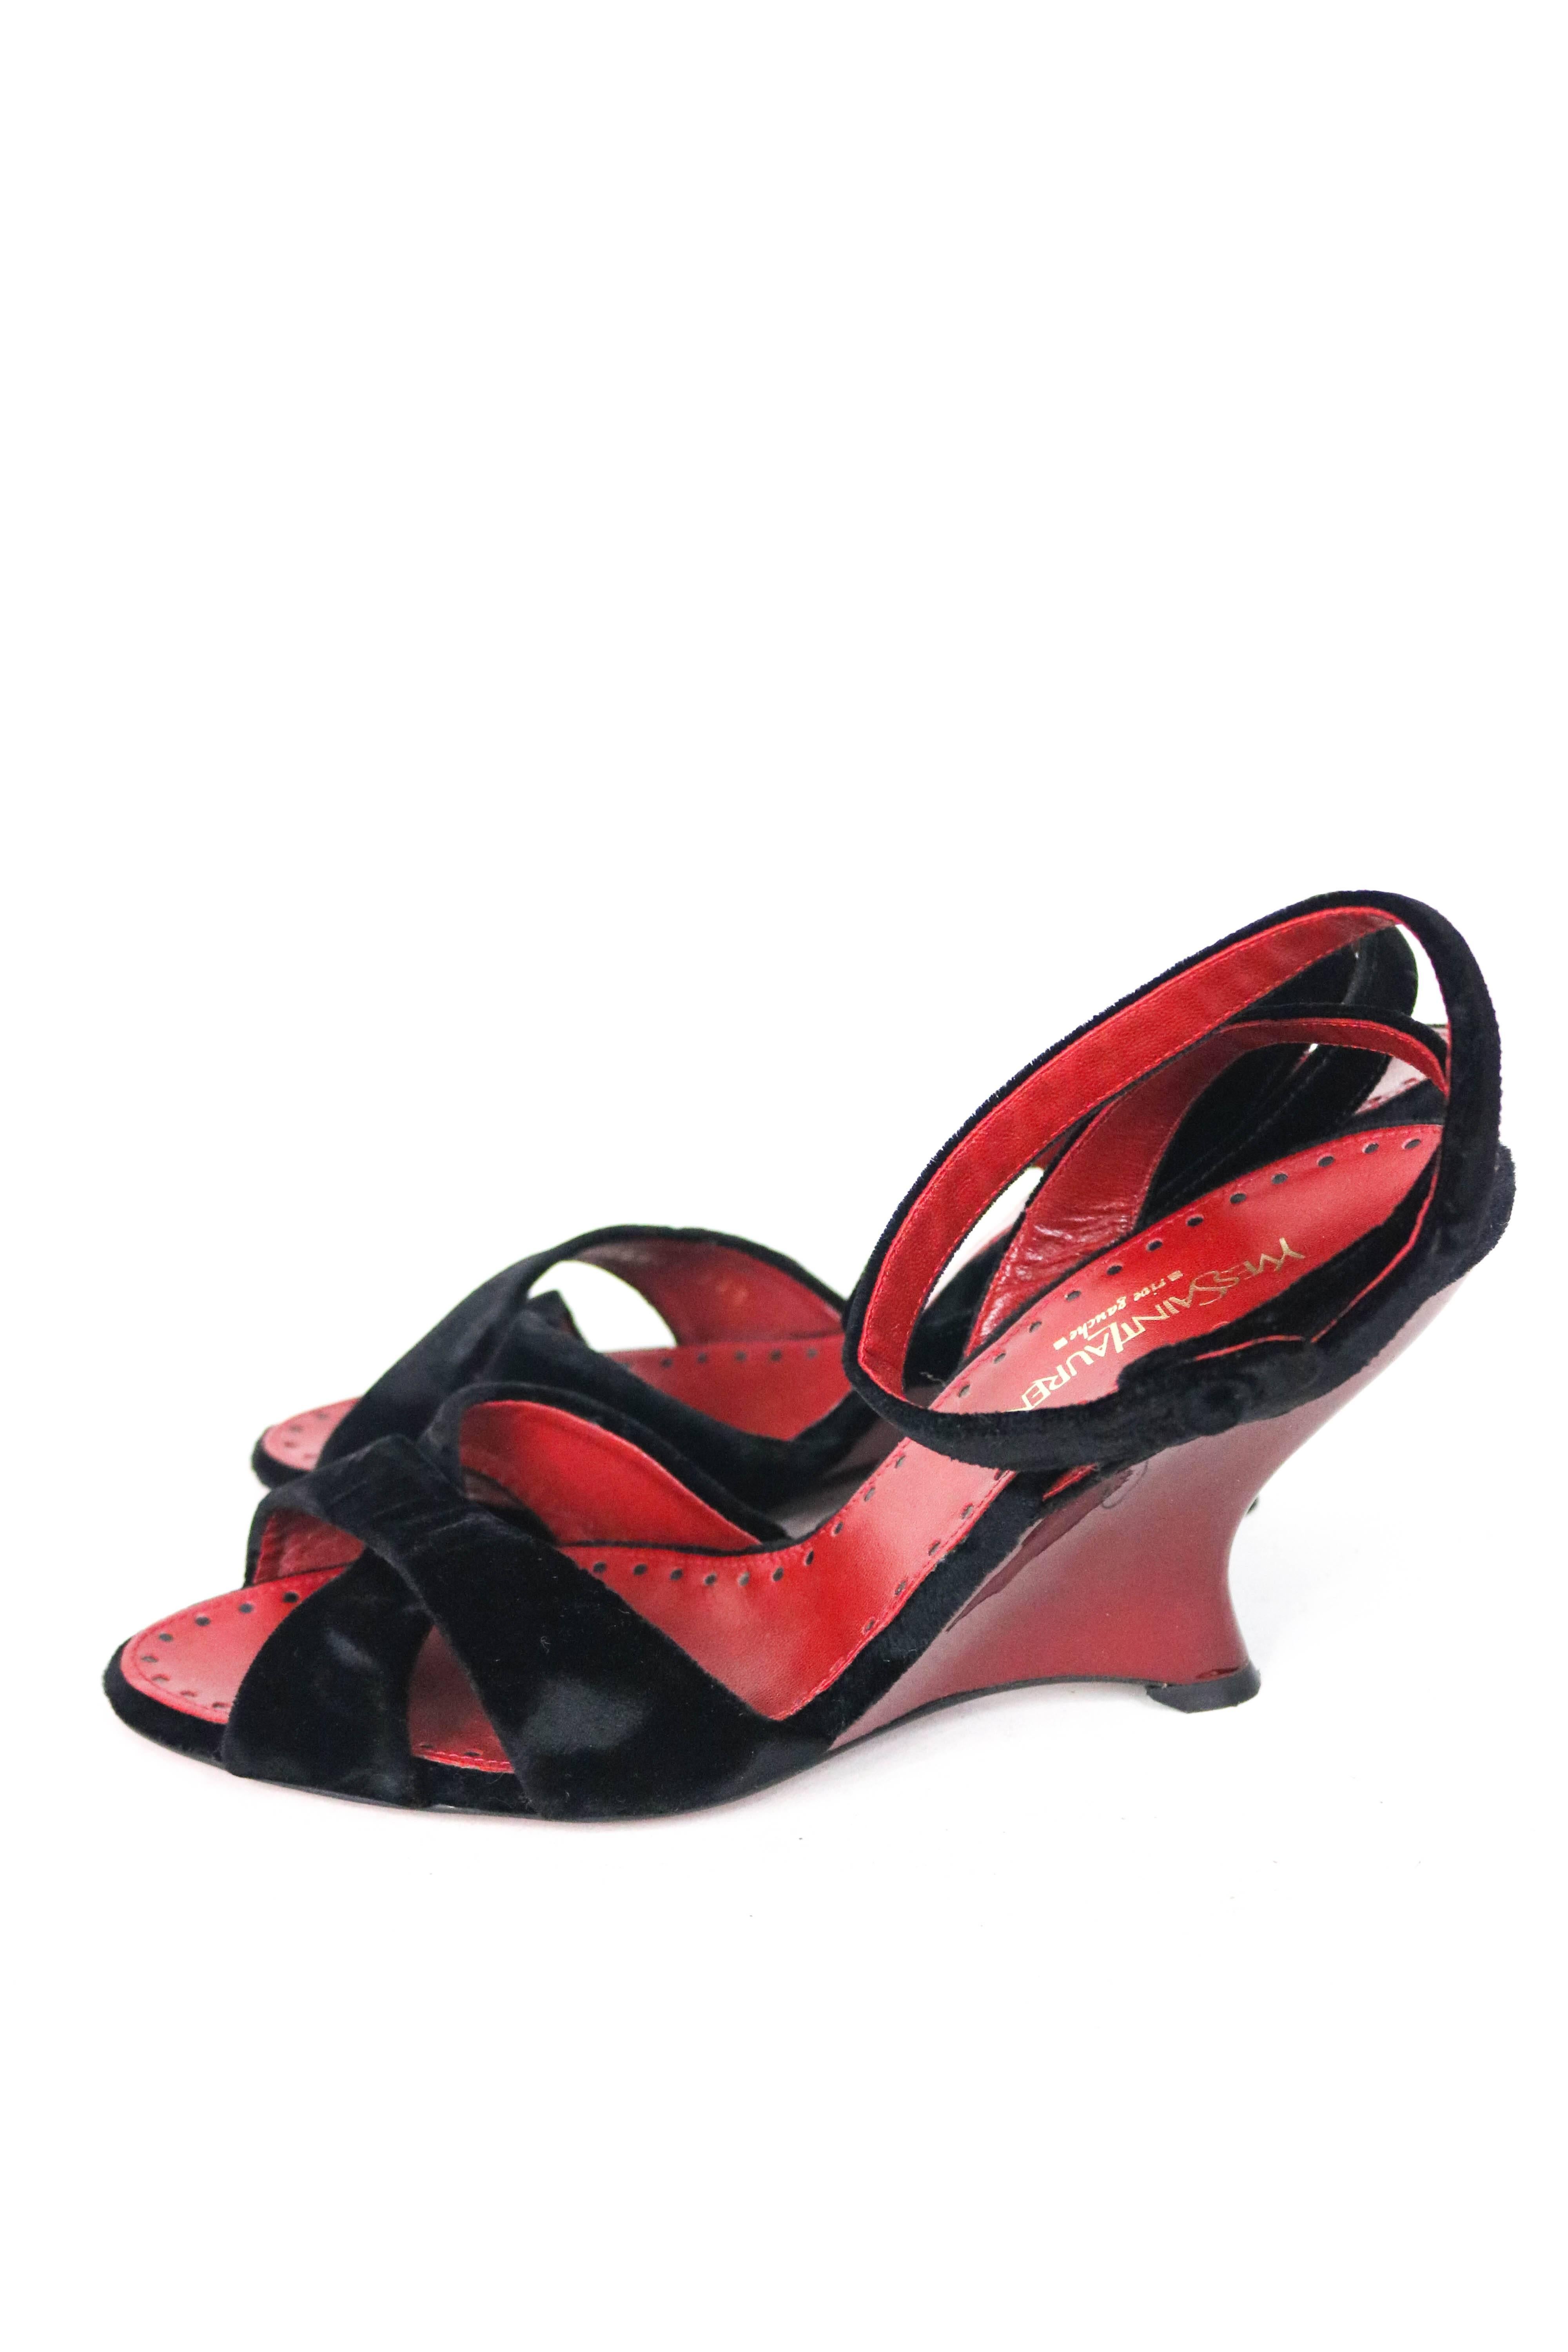 Offered is a gently pre-owned pair of Yves Saint Laurent black velvet evening shoes with a beautiful glossy sculptured wedge heel.  A twist across the front and a delicate ankle strap compose the upper, and the cole is classic red.  Worn gently ,